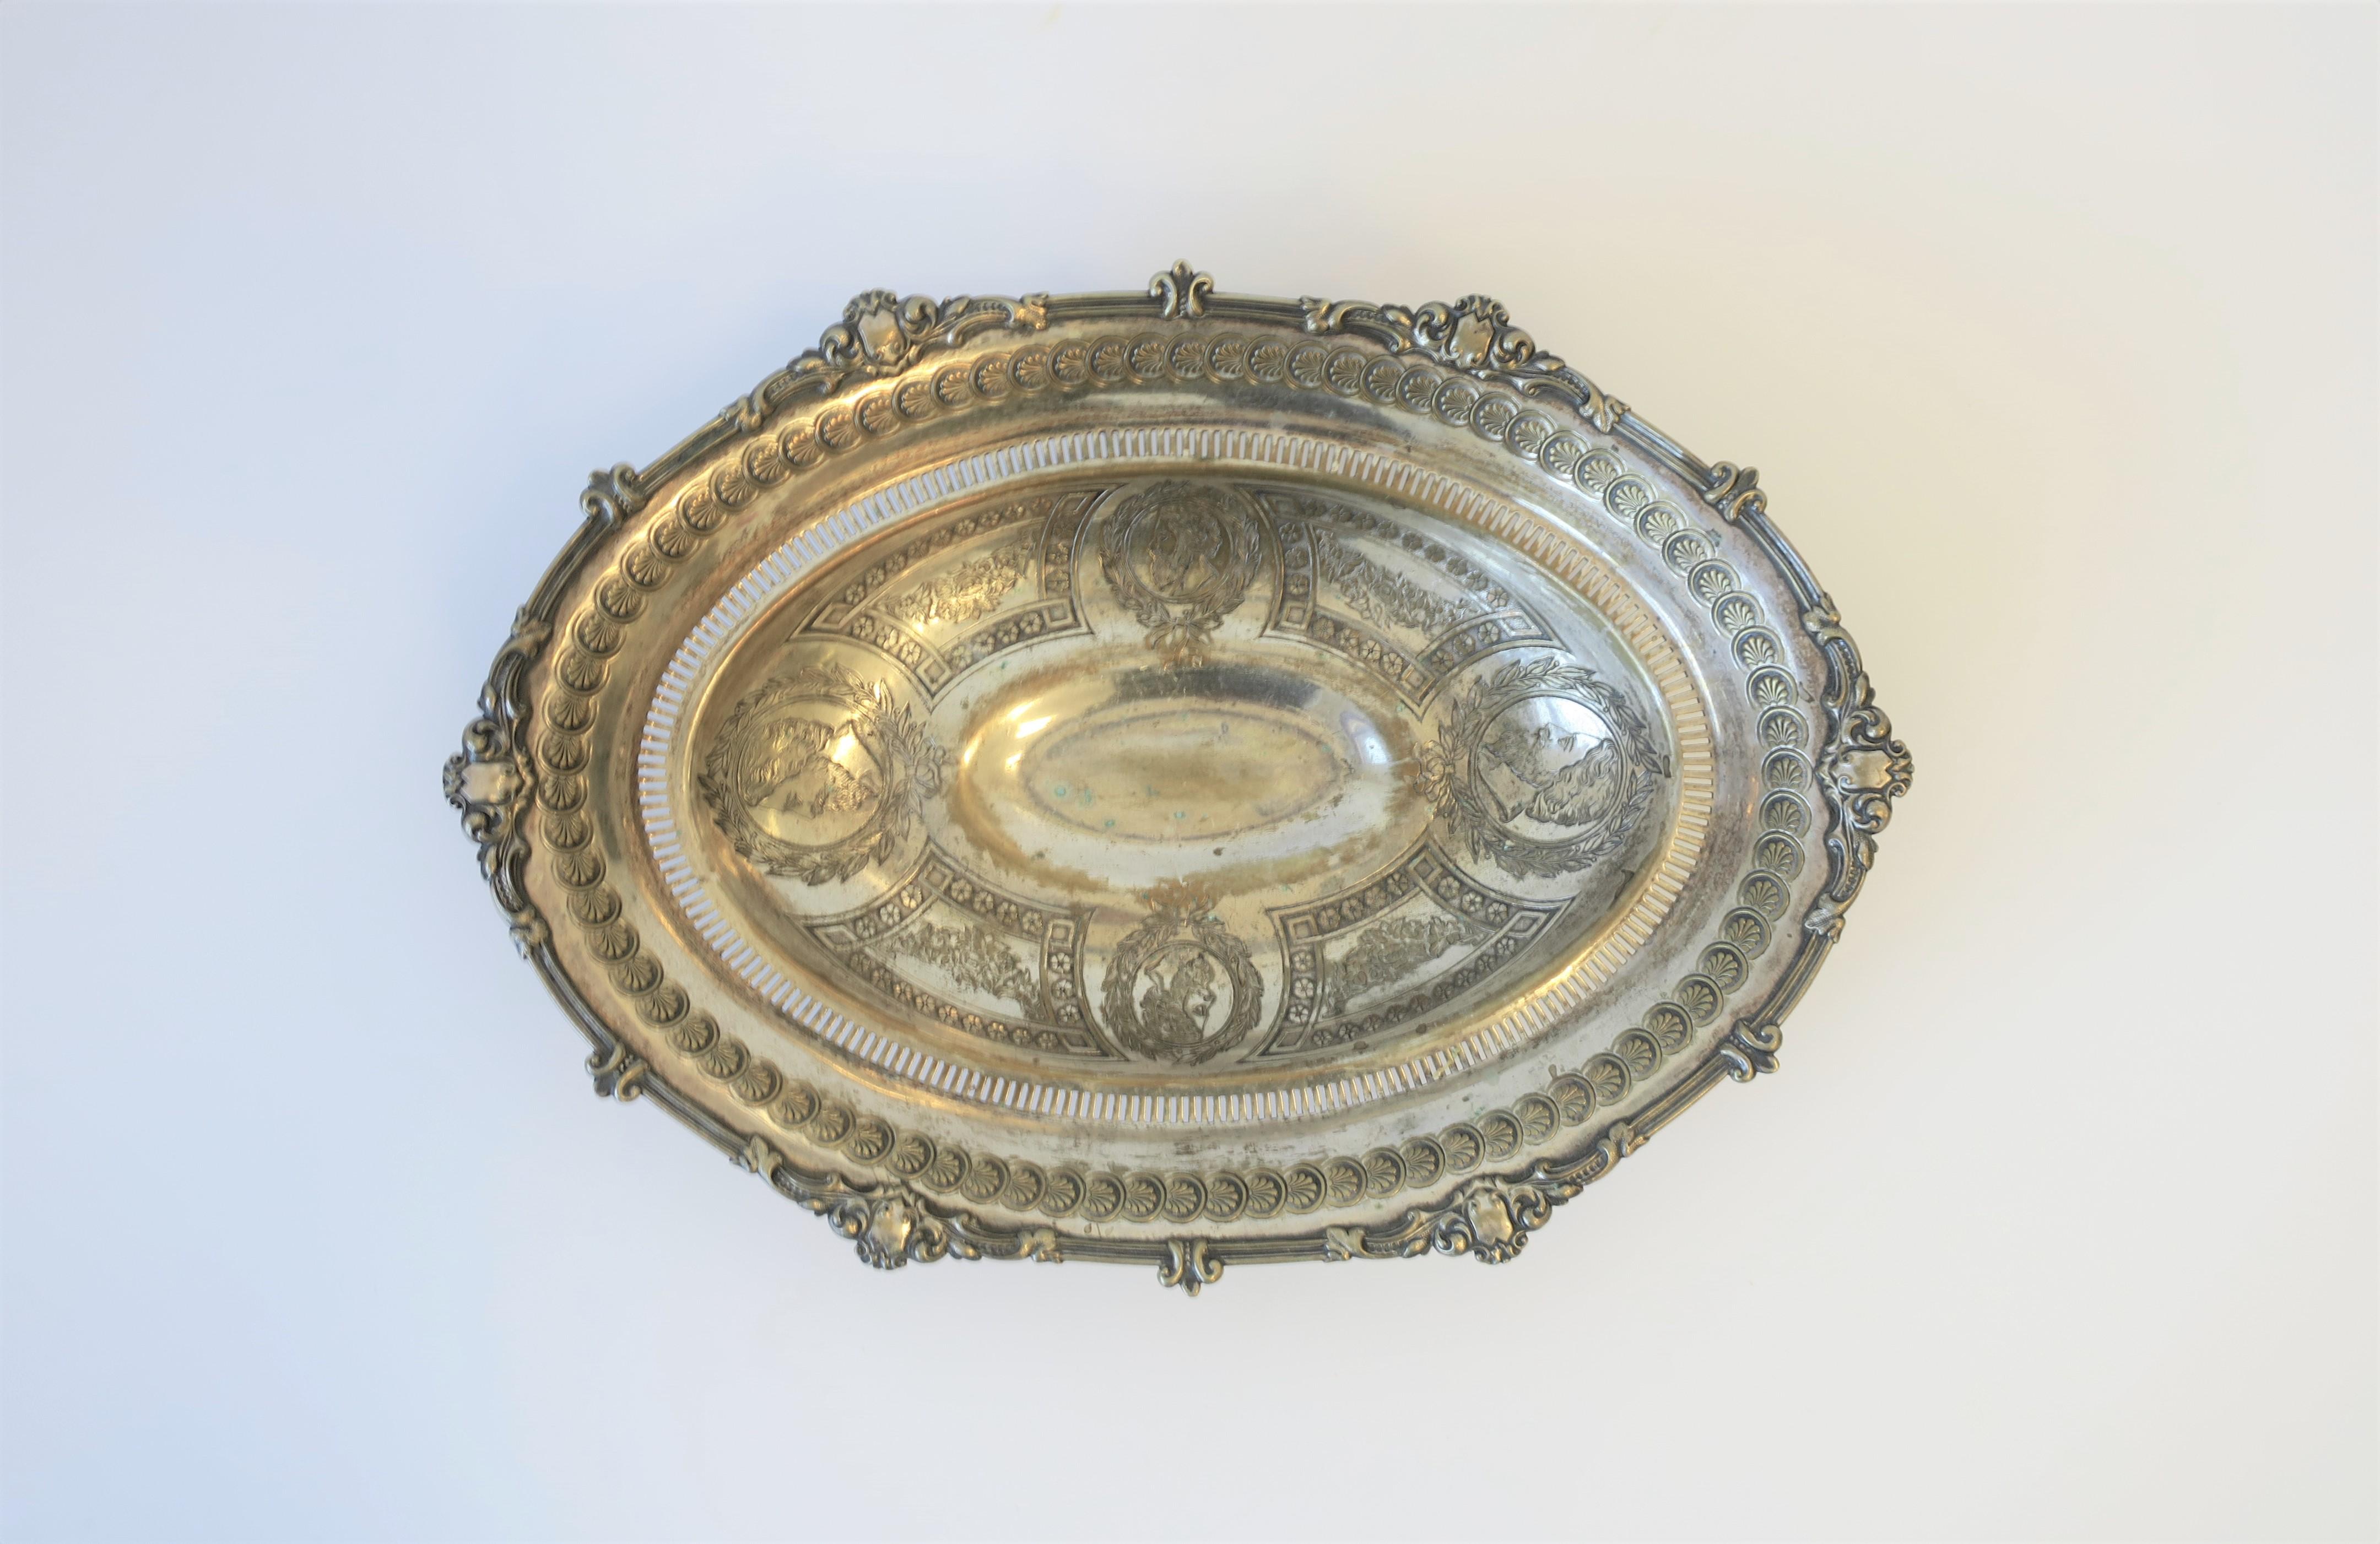 Embossed English Silver Footed Compote Bowl